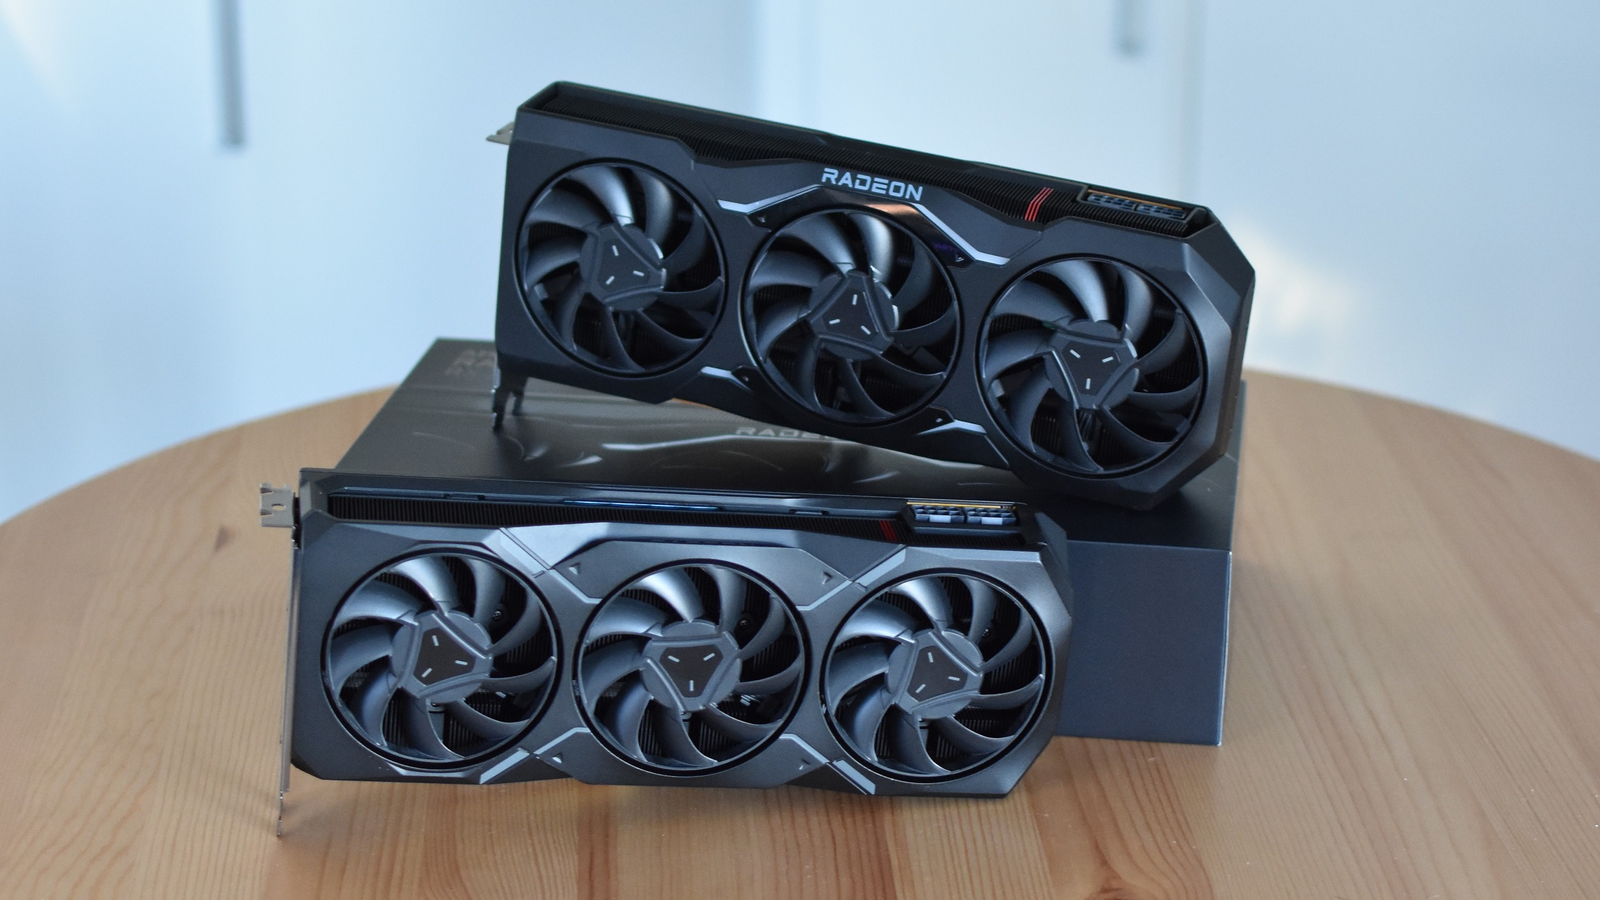 AMD Radeon RX 7900 XT and Radeon RX 7900 XTX review: rise of the reds